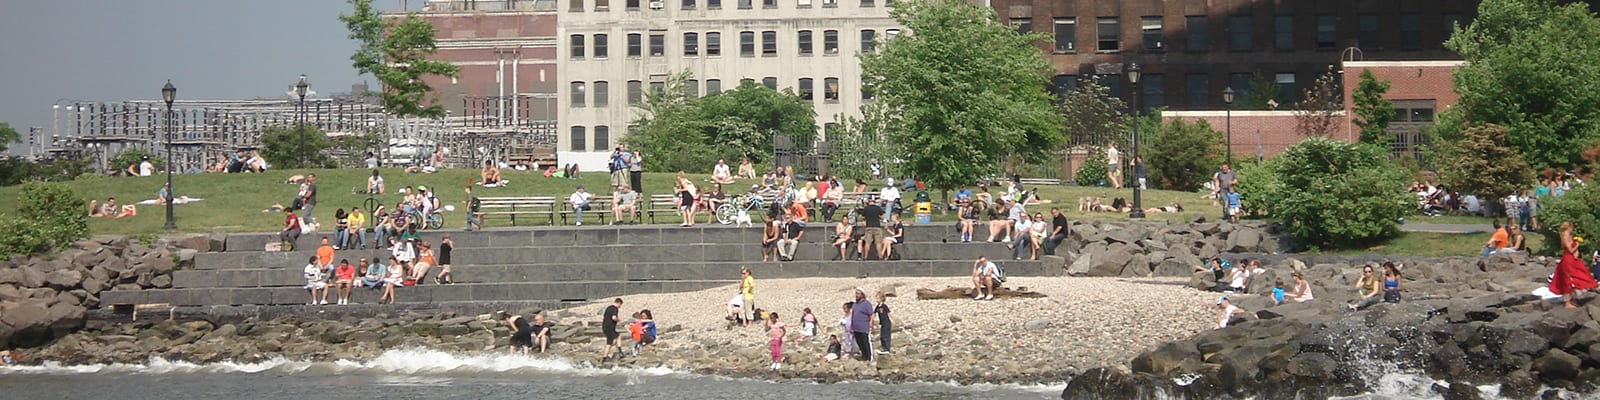 Photo of people standing and sitting on a beach.